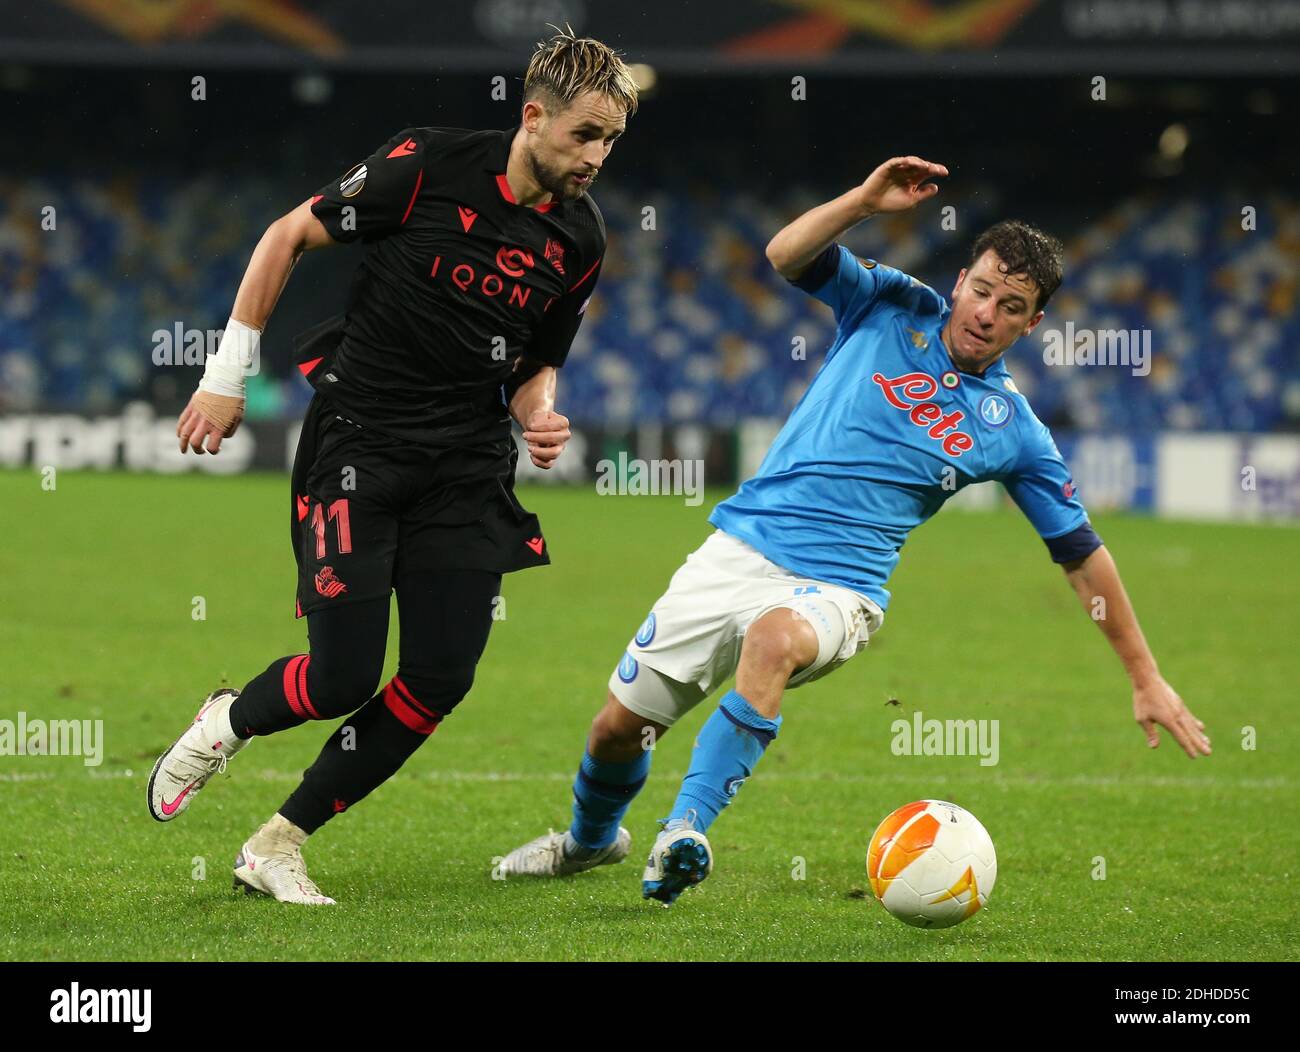 Naples, Italy. 10th Dec, 2020. Real Sociedad's Belgian midfielder Adnan Januzaj fights for the ball with Napoli's German midfielder Diego Demme during the UEFA Europa League Group F football match SSC Napoli vs Real Sociedad de Futbol. Napoli and Real Sociedad drew 1-1. Credit: Independent Photo Agency/Alamy Live News Stock Photo